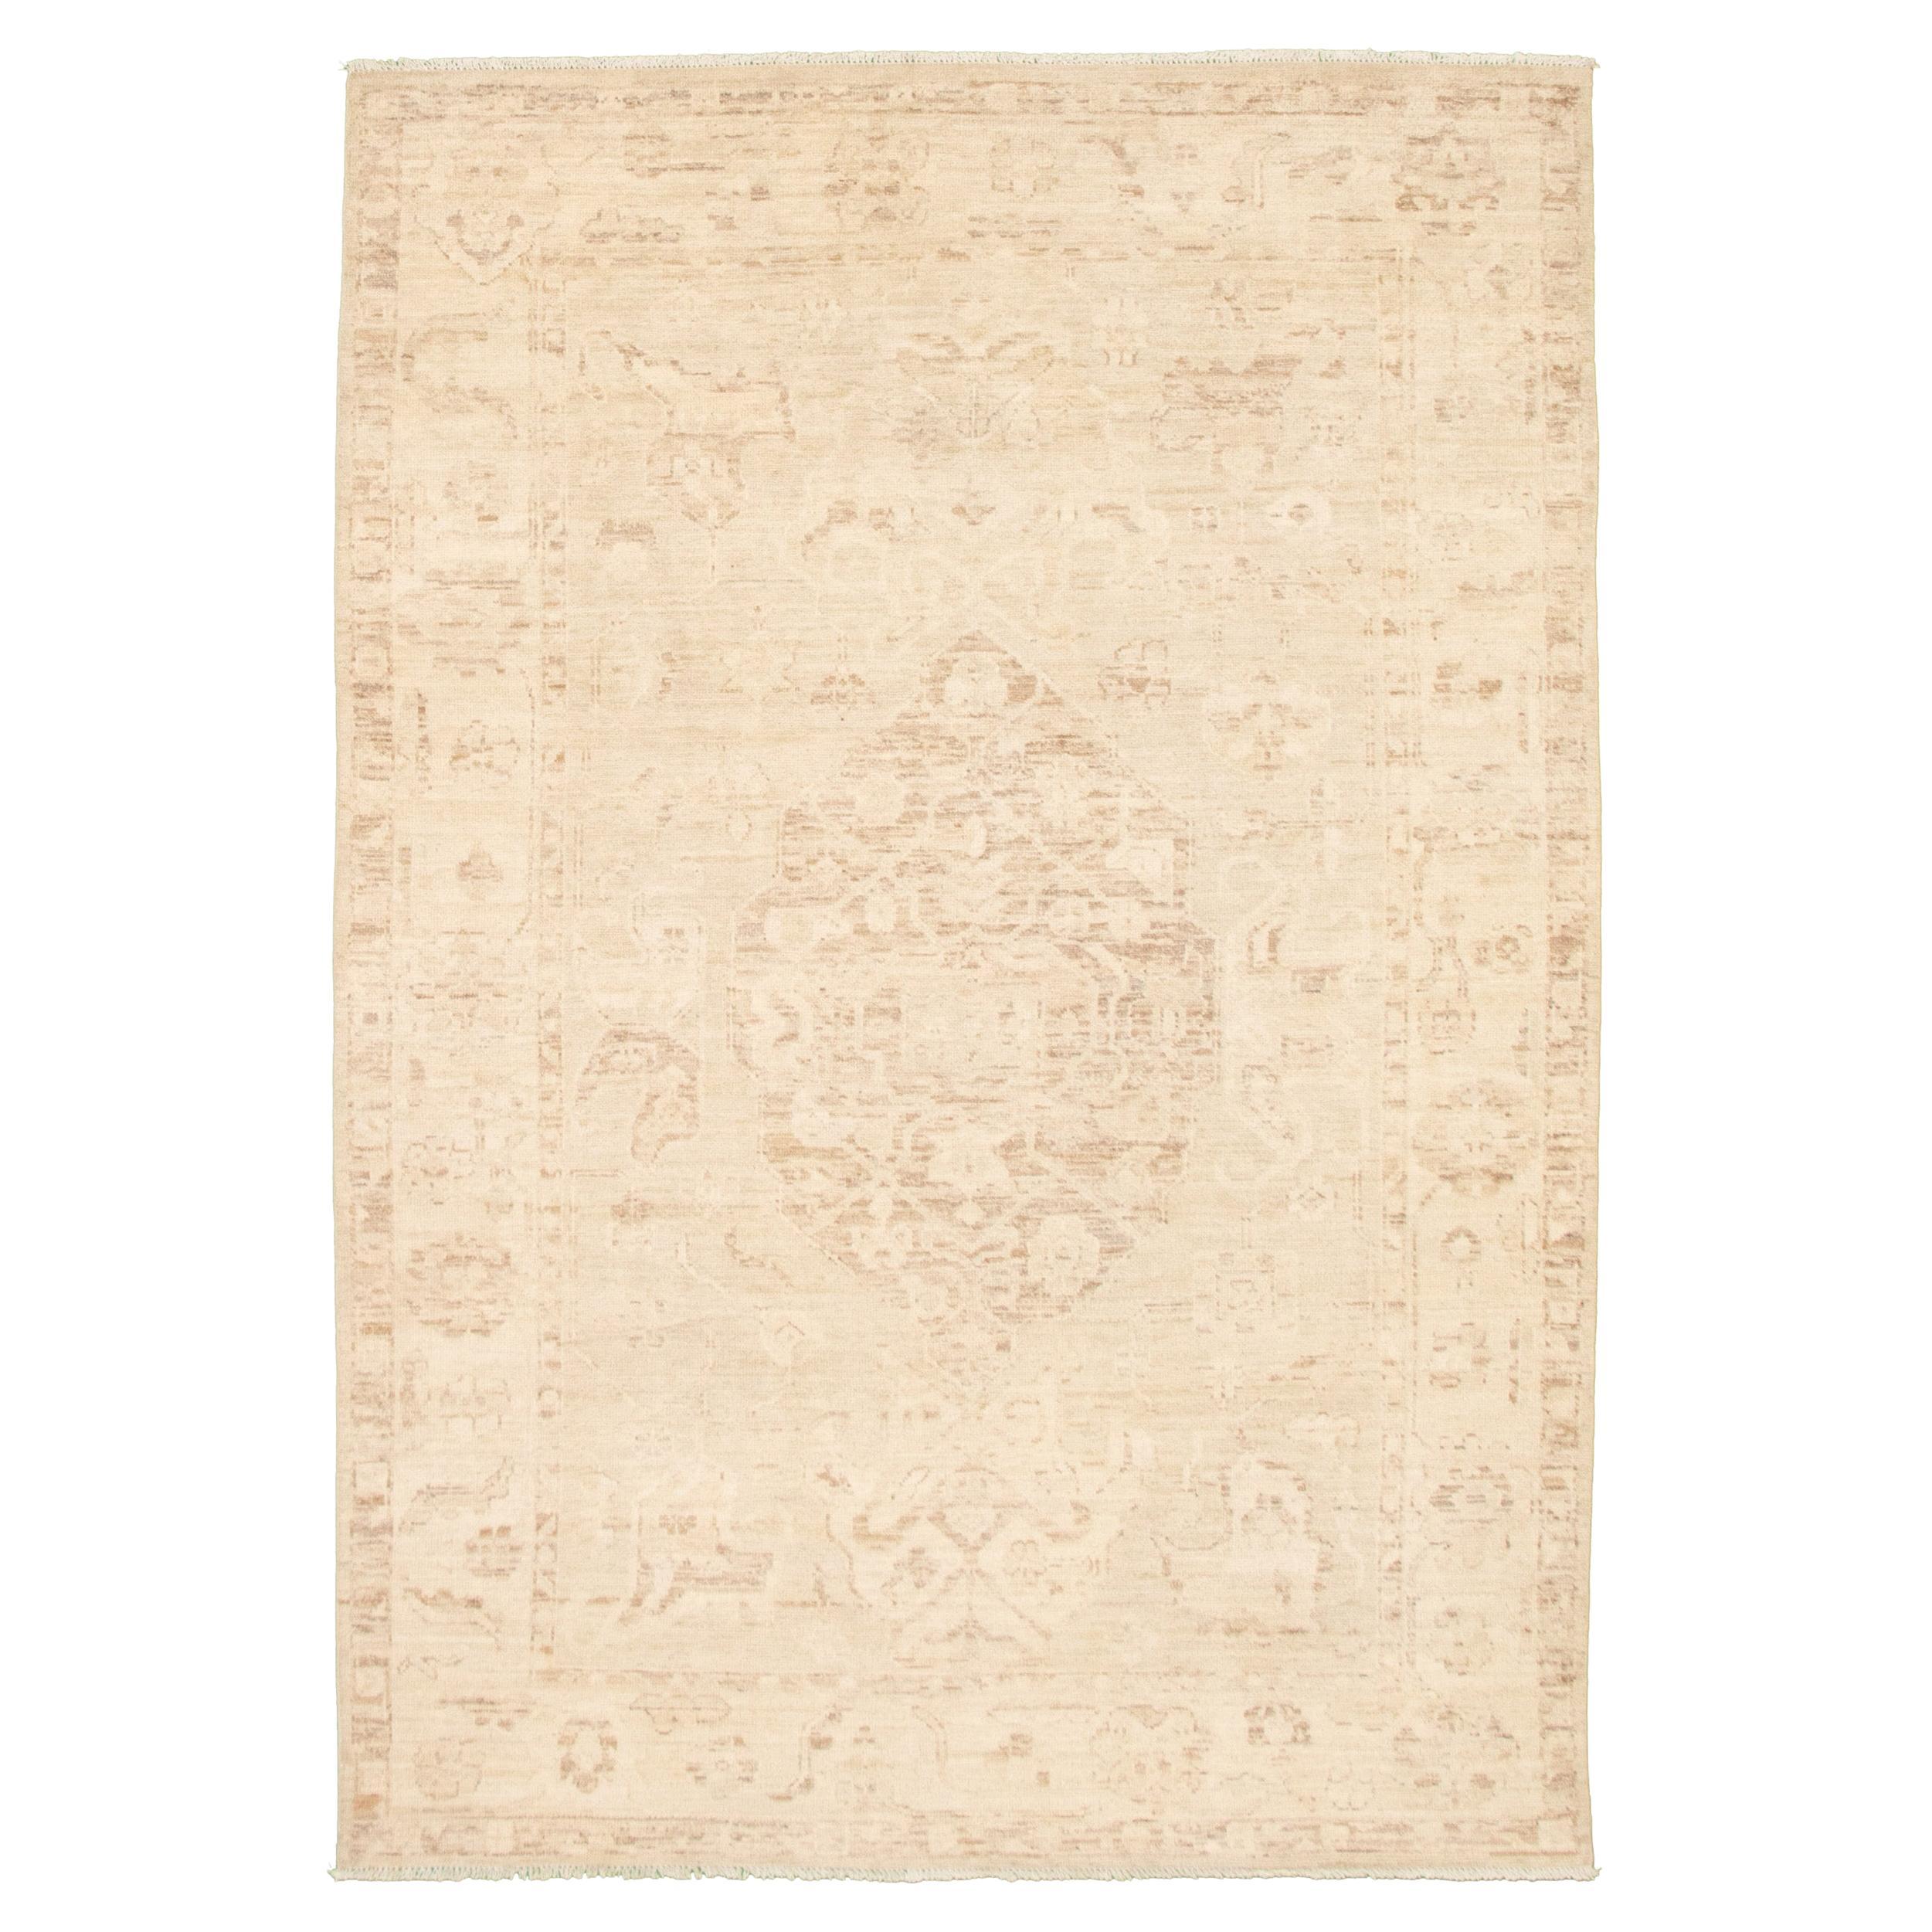 Formal and Subdued Transitional Wool Persian Oushak Carpet, 6' x 9'